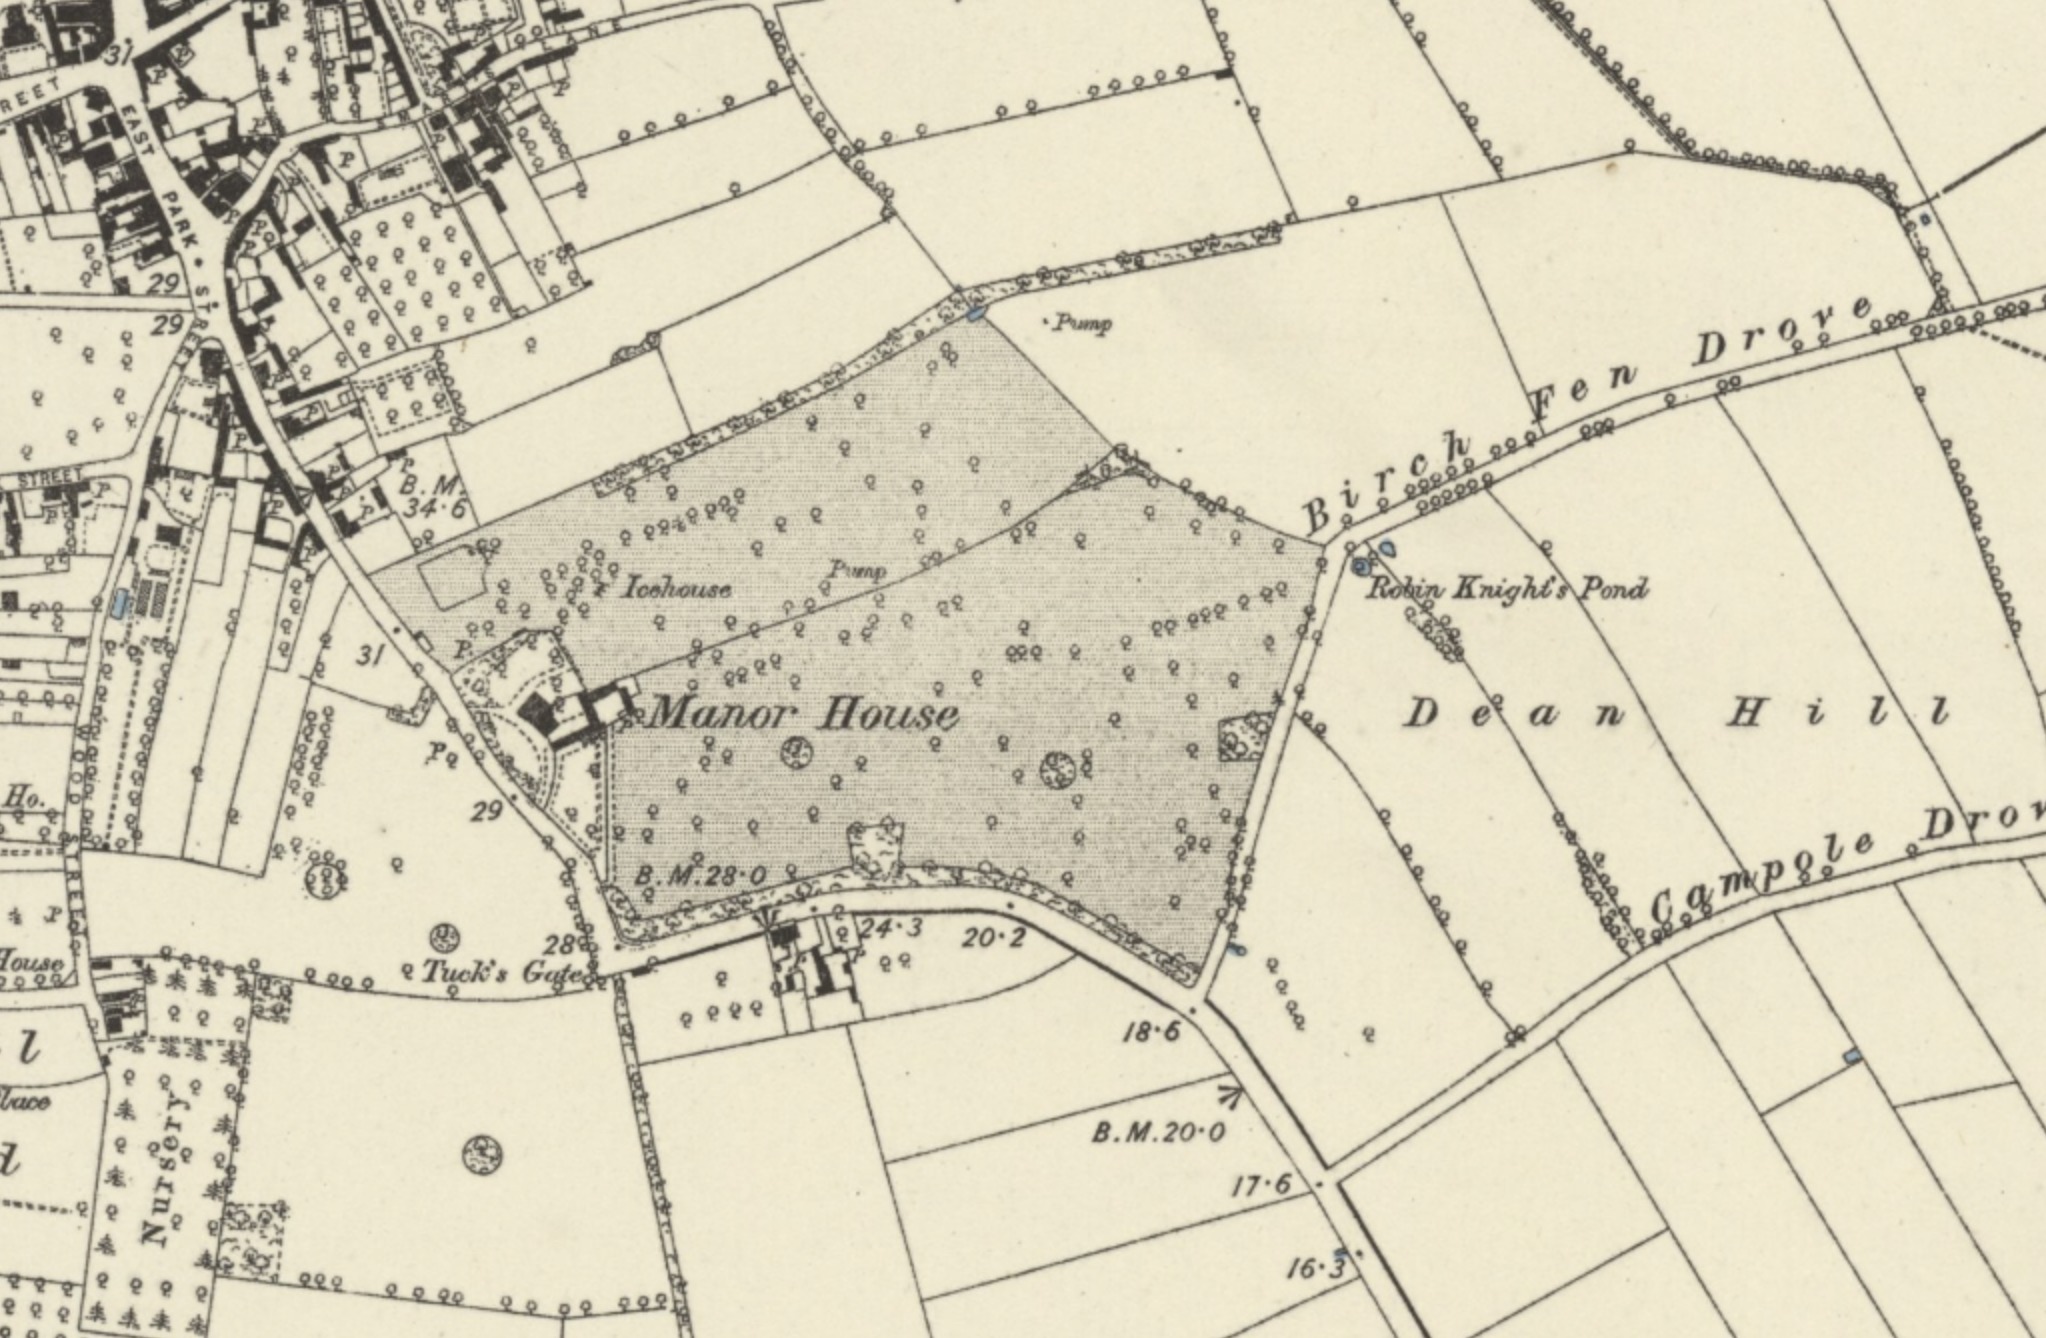 An historic map showing the former Chatteris Manor Park